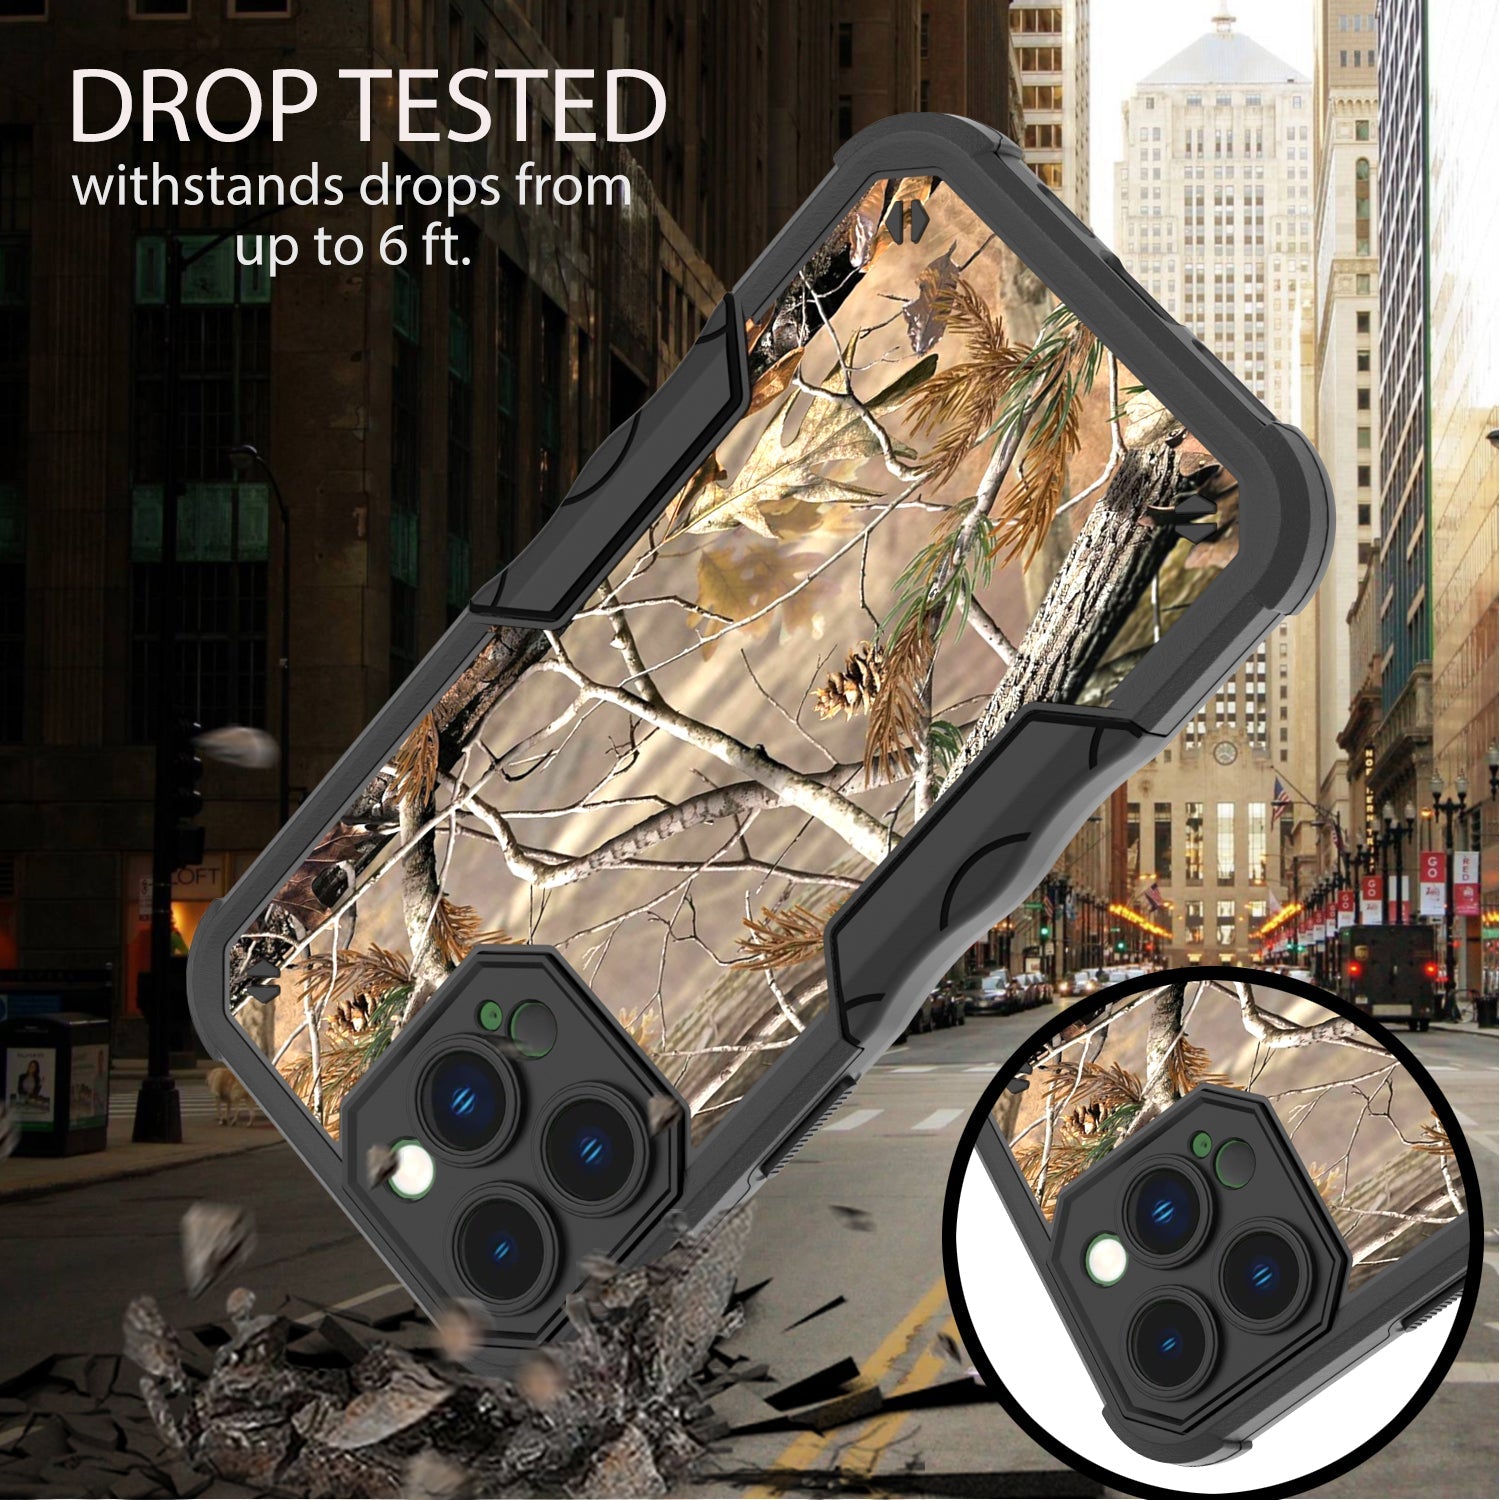 Apple iPhone 14 Pro Max Case Heavy Duty Military Grade Phone Cover